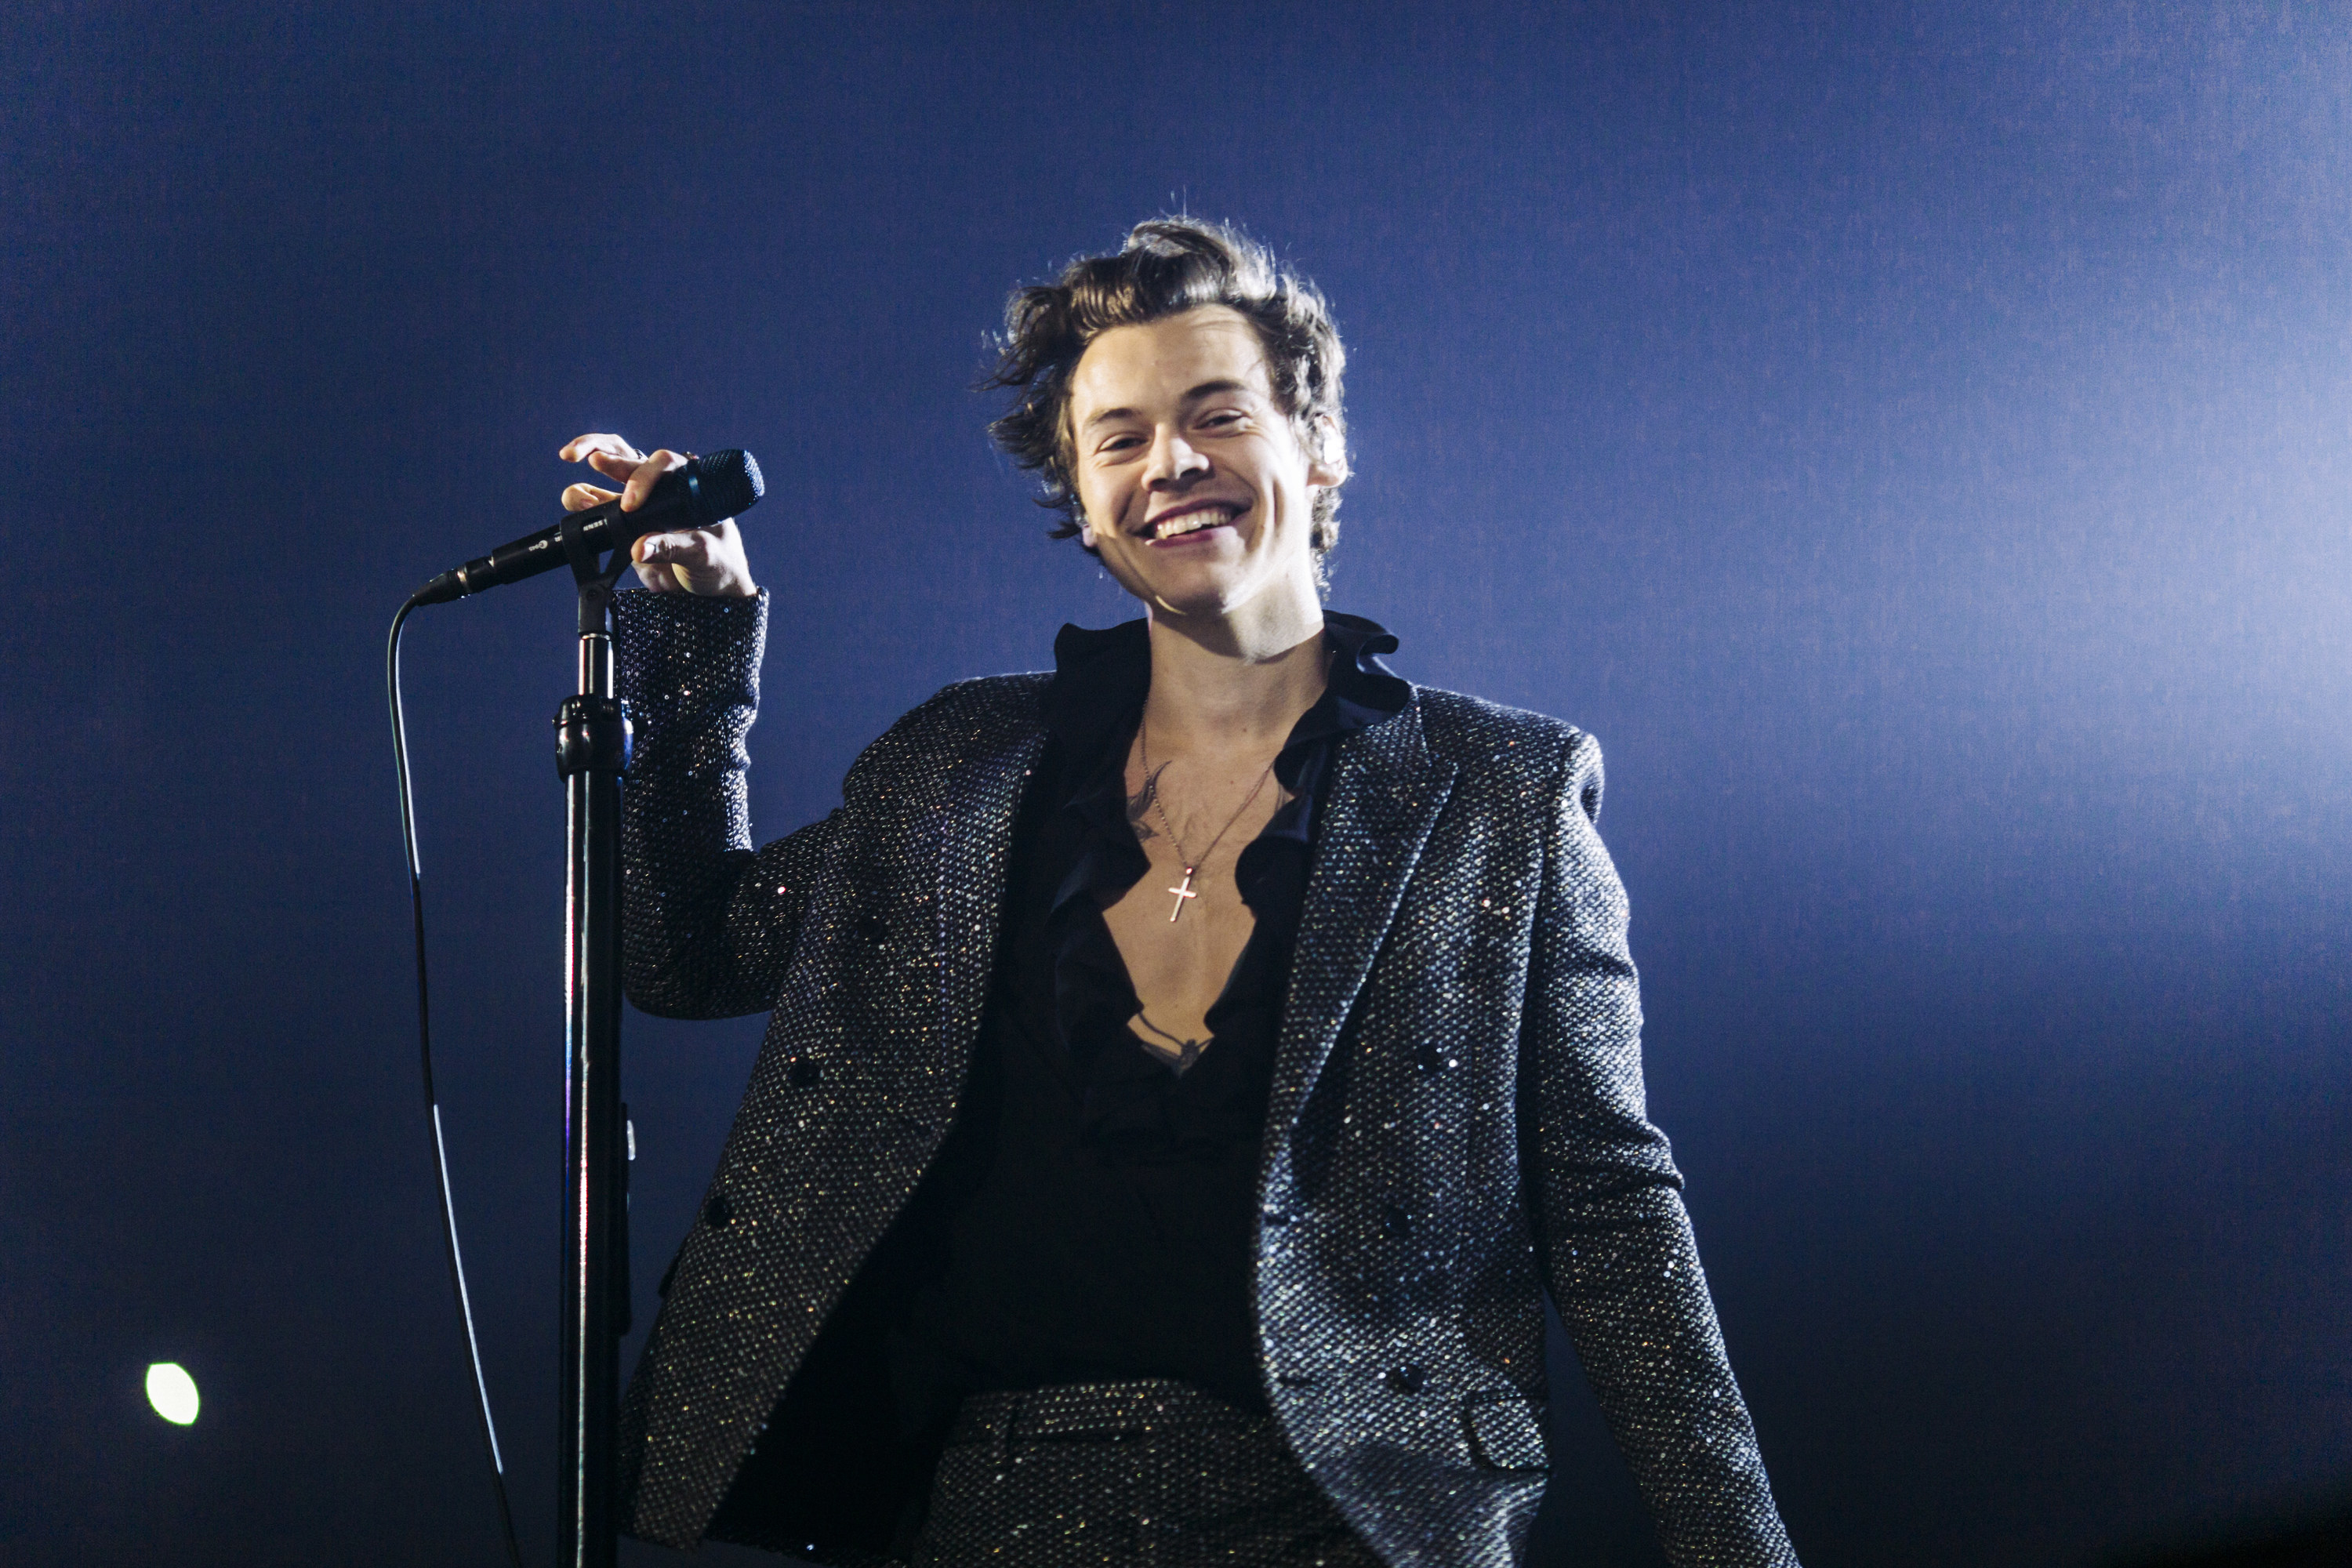 A closeup of Harry performing on stage